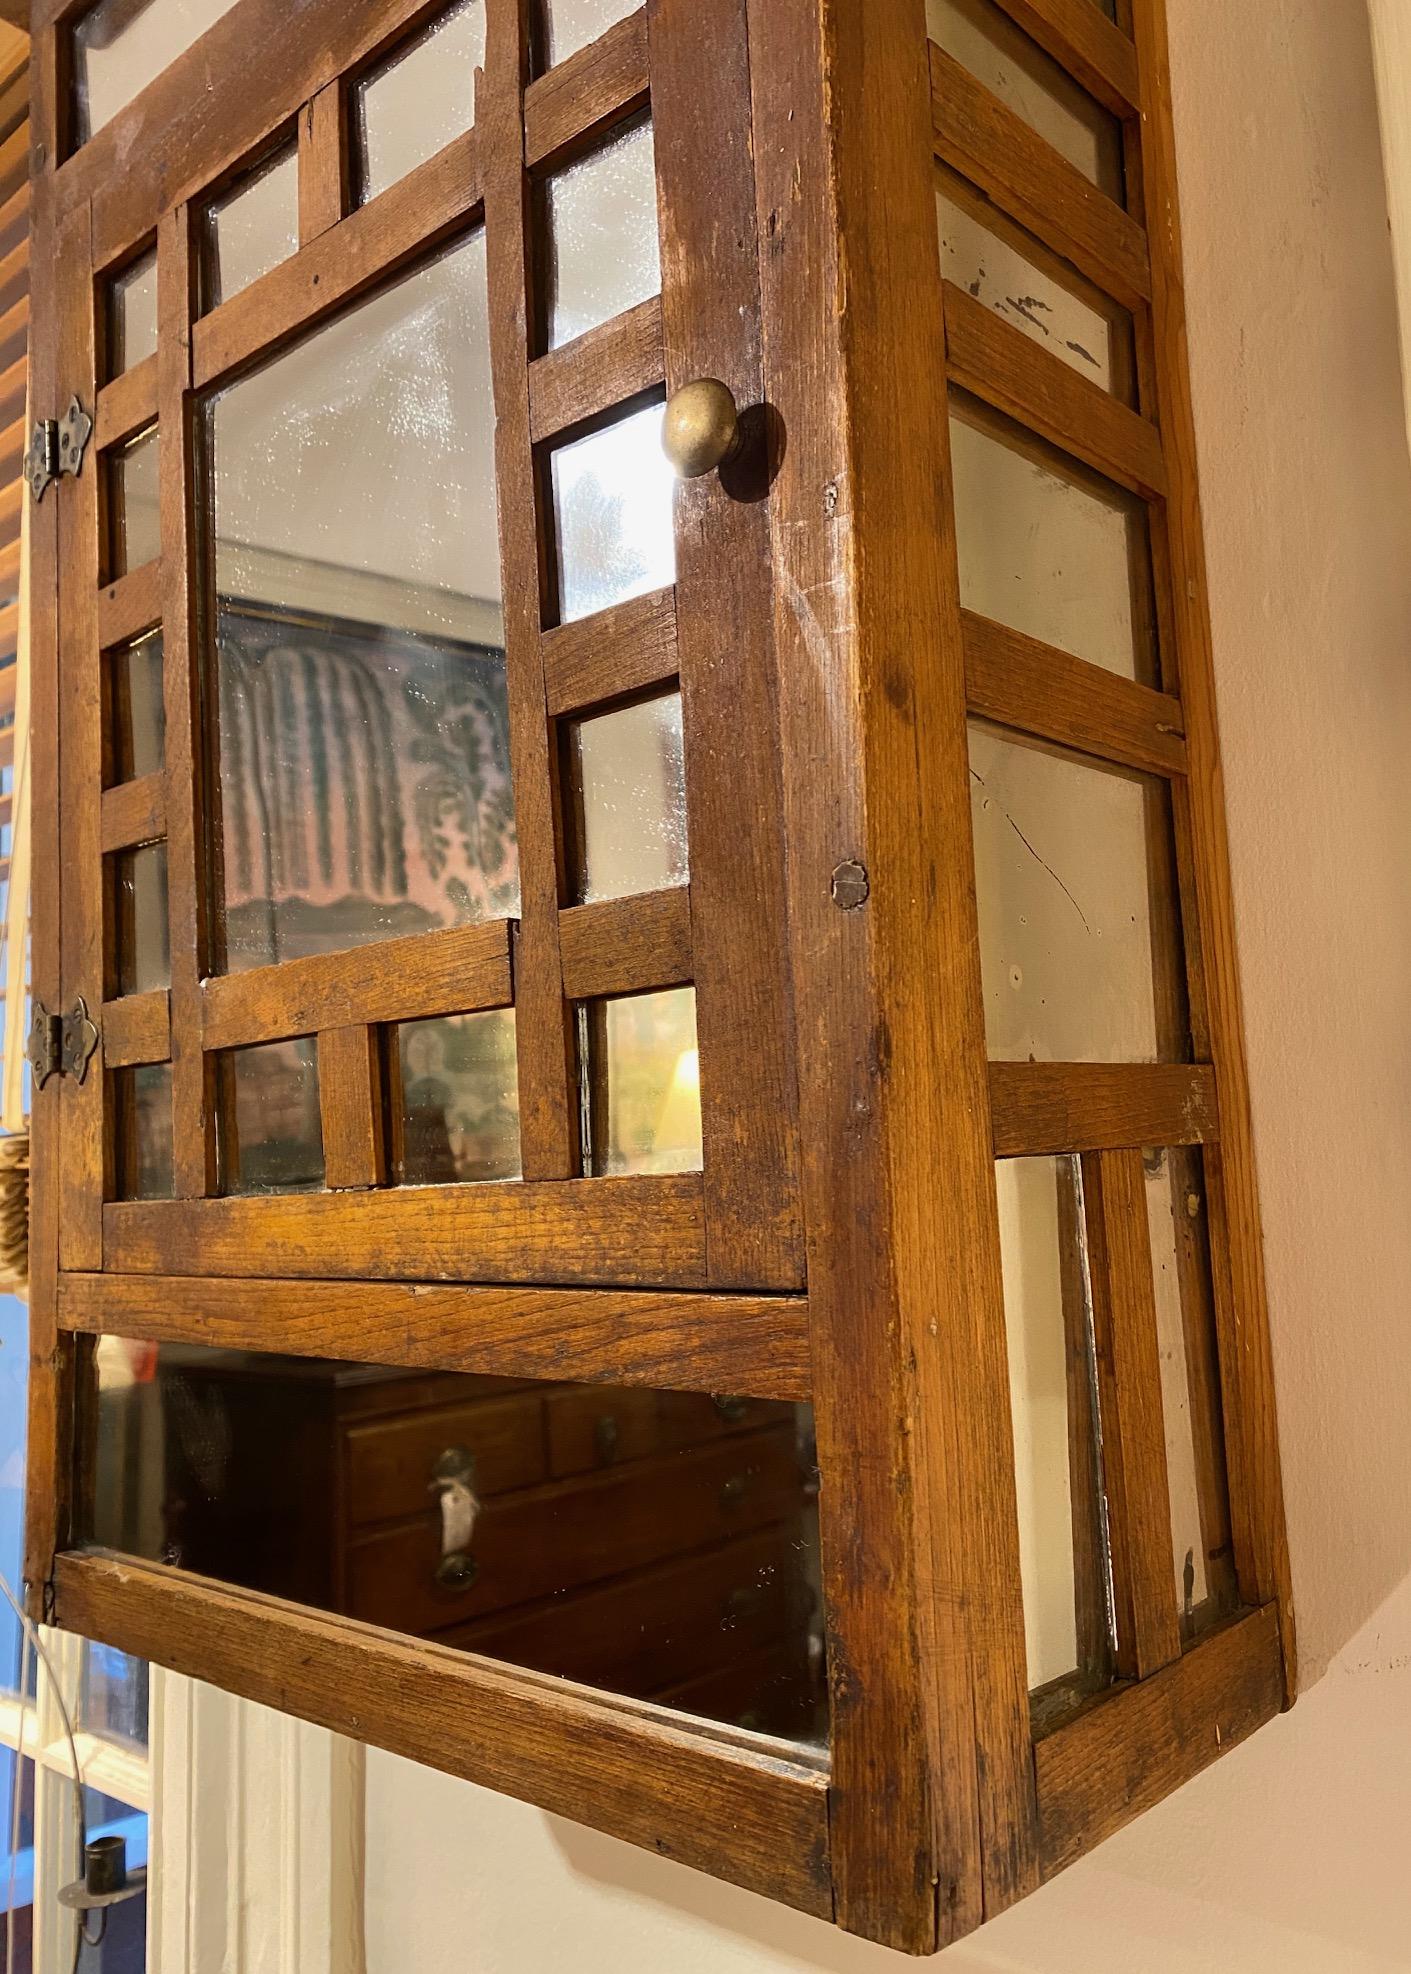 Antique Rustic Home Made Oak Mirrored Hanging Cupboard, circa 1890, from Quebec or northern Vermont, a lovely  cabinet with a number of mirror panels set on the door and sides. A home-built farmhouse piece, crude and charming, and very unusual.

The